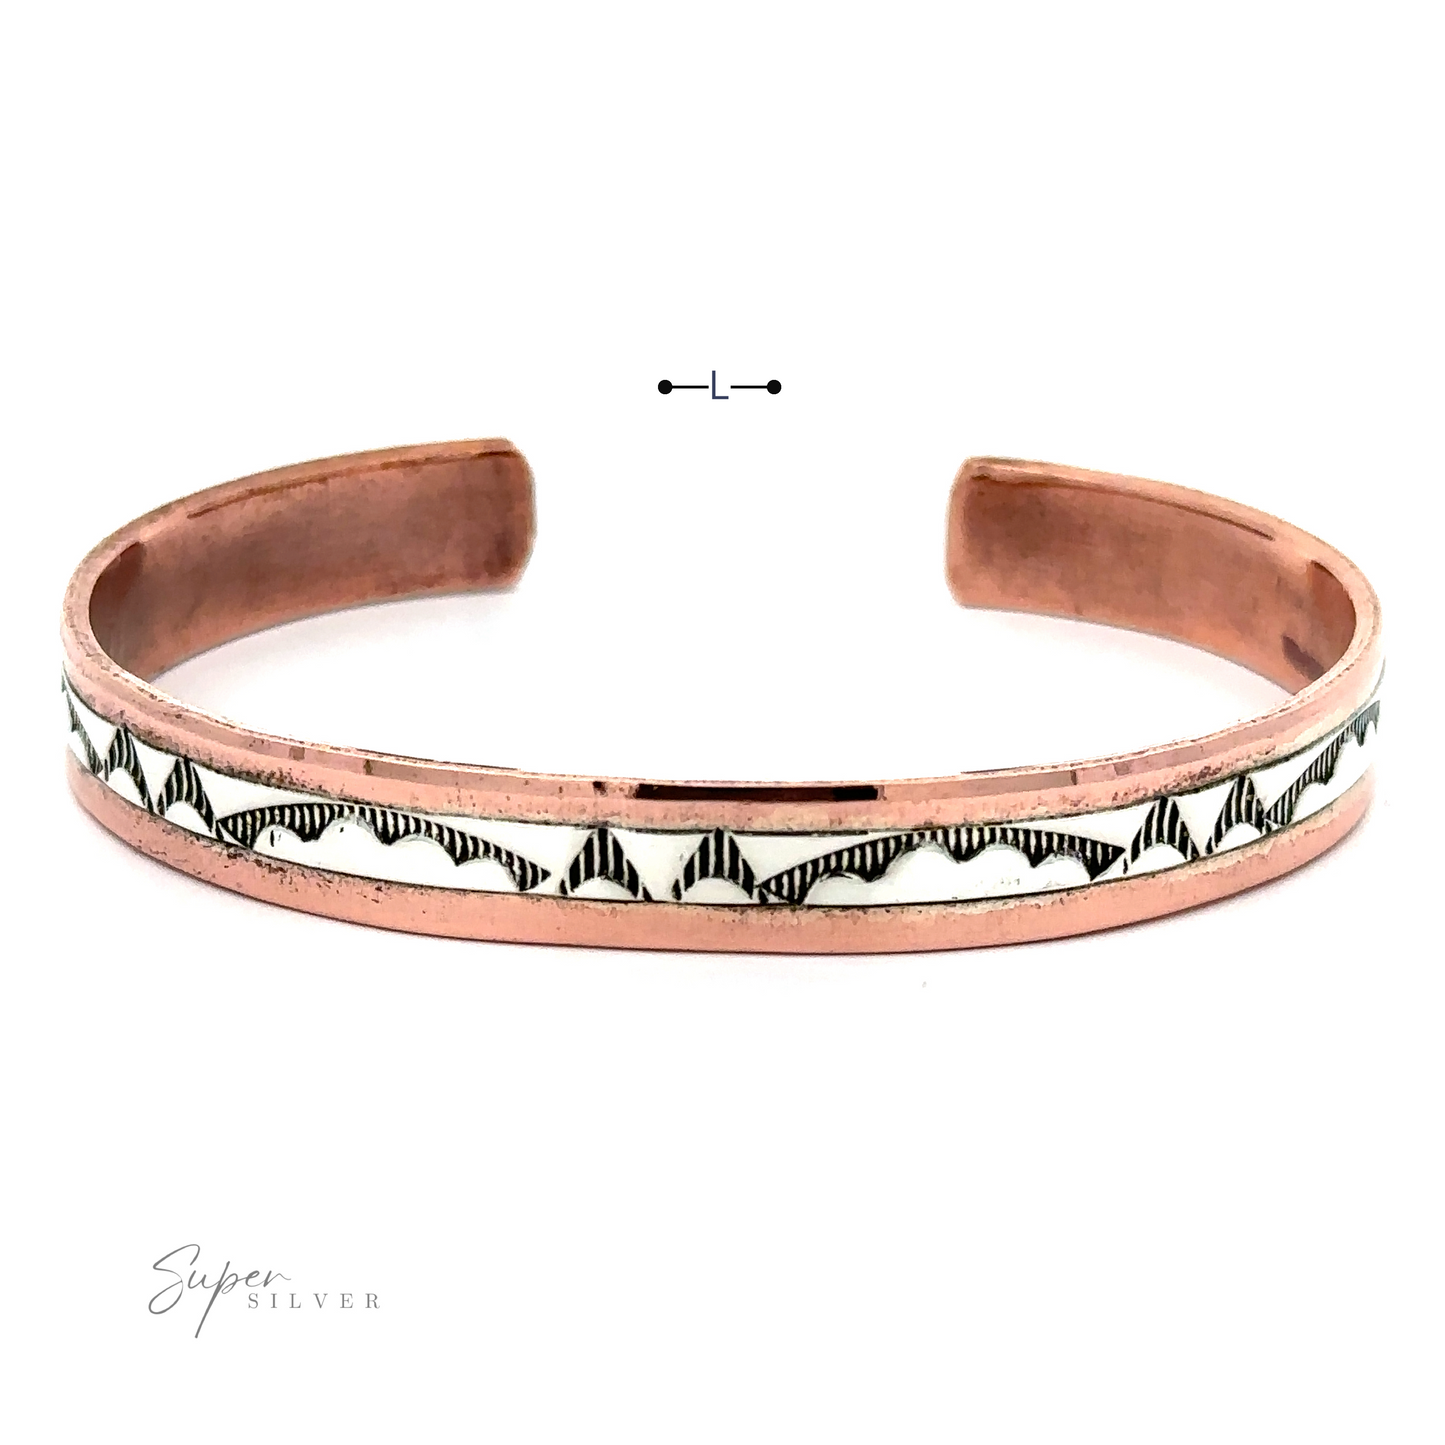 
                  
                    A Native American Handmade Copper And Silver Bracelet featuring a black and white patterned inlay design, with an adjustable gap. A "Super Silver" logo is visible on the bottom-left corner, showcasing Sterling Silver elements and Native American handcrafted artistry.
                  
                